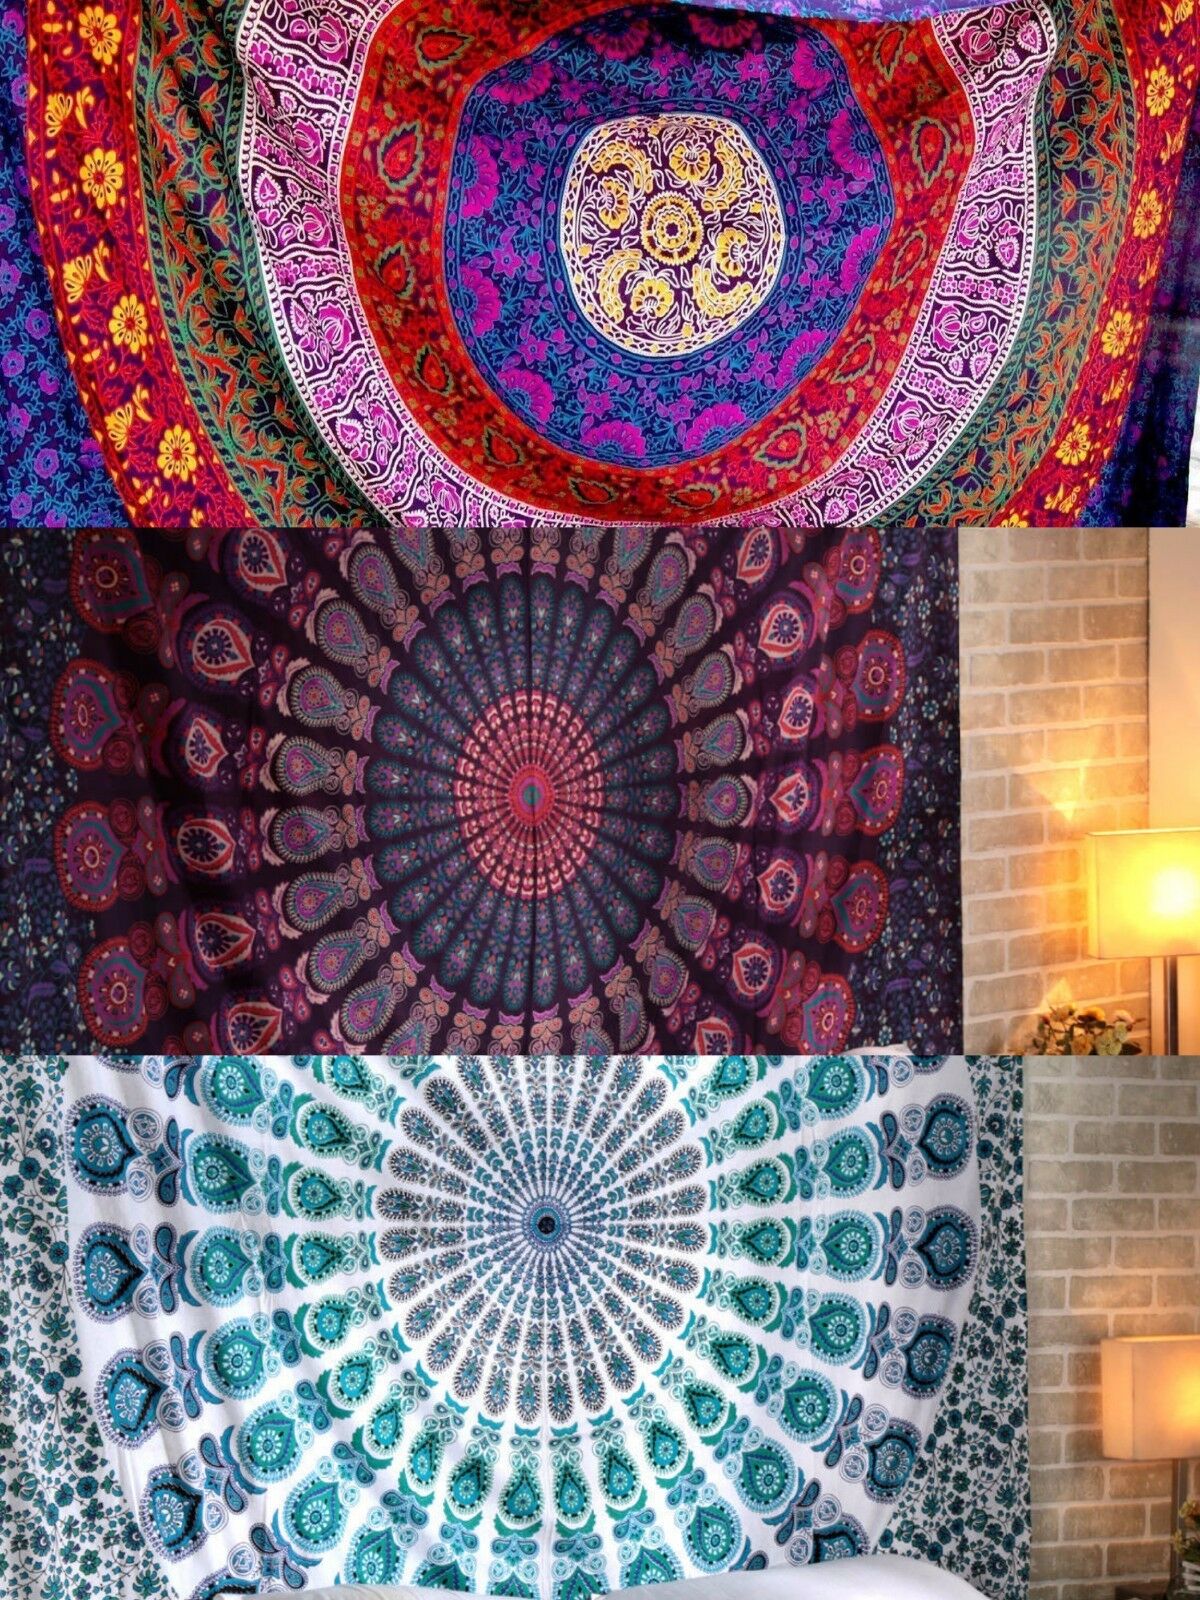 10 Pics Wholesale Lot Hippie Indian Mandala Tapestry Wall Hanging Twin Throws